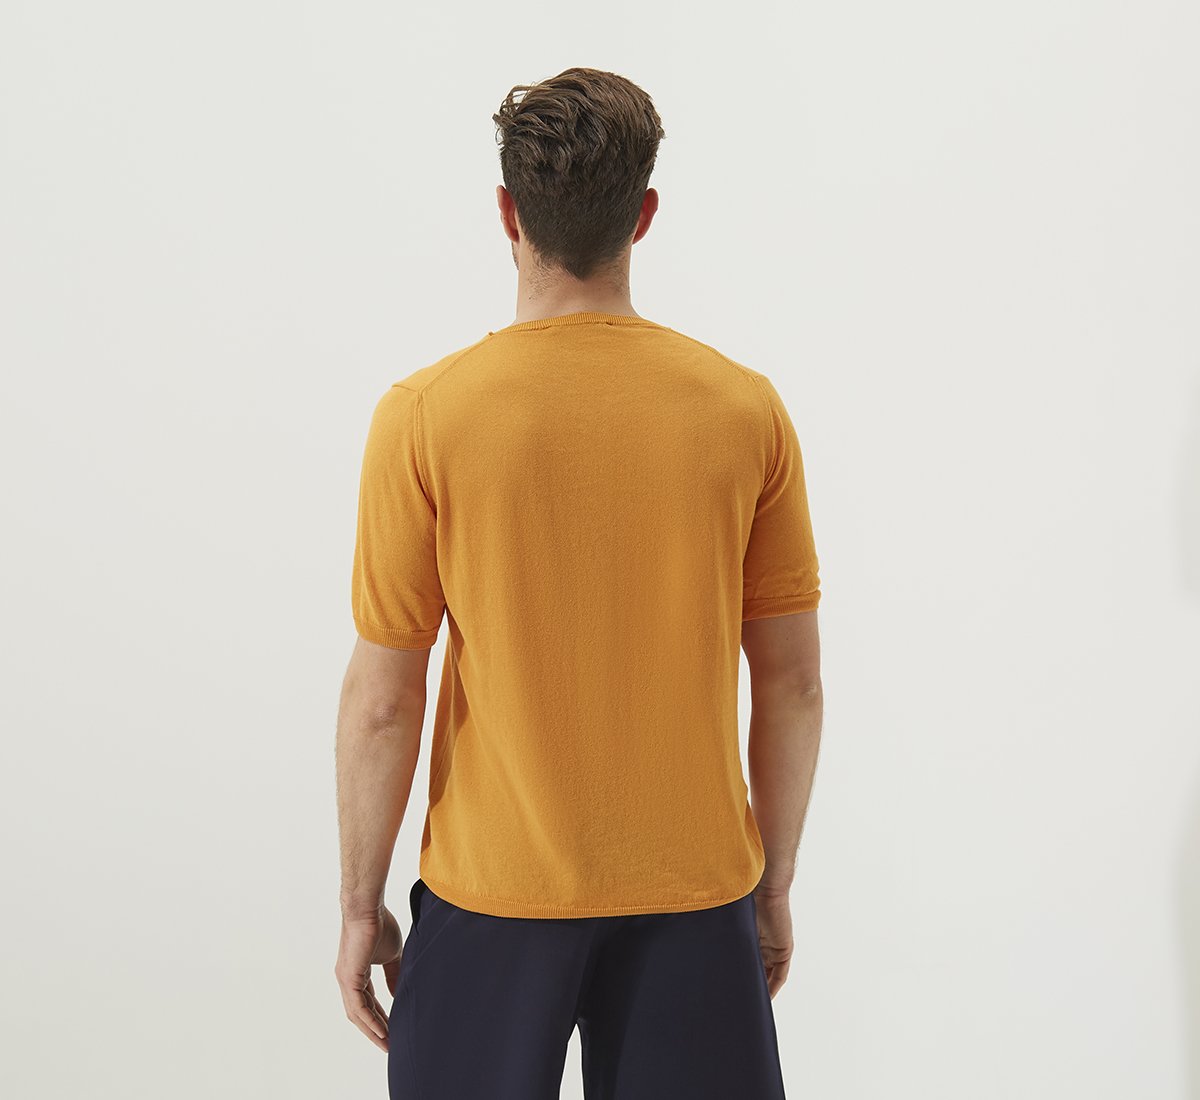 ORANGE JERSEY T-SHIRT WITH BUTTONS